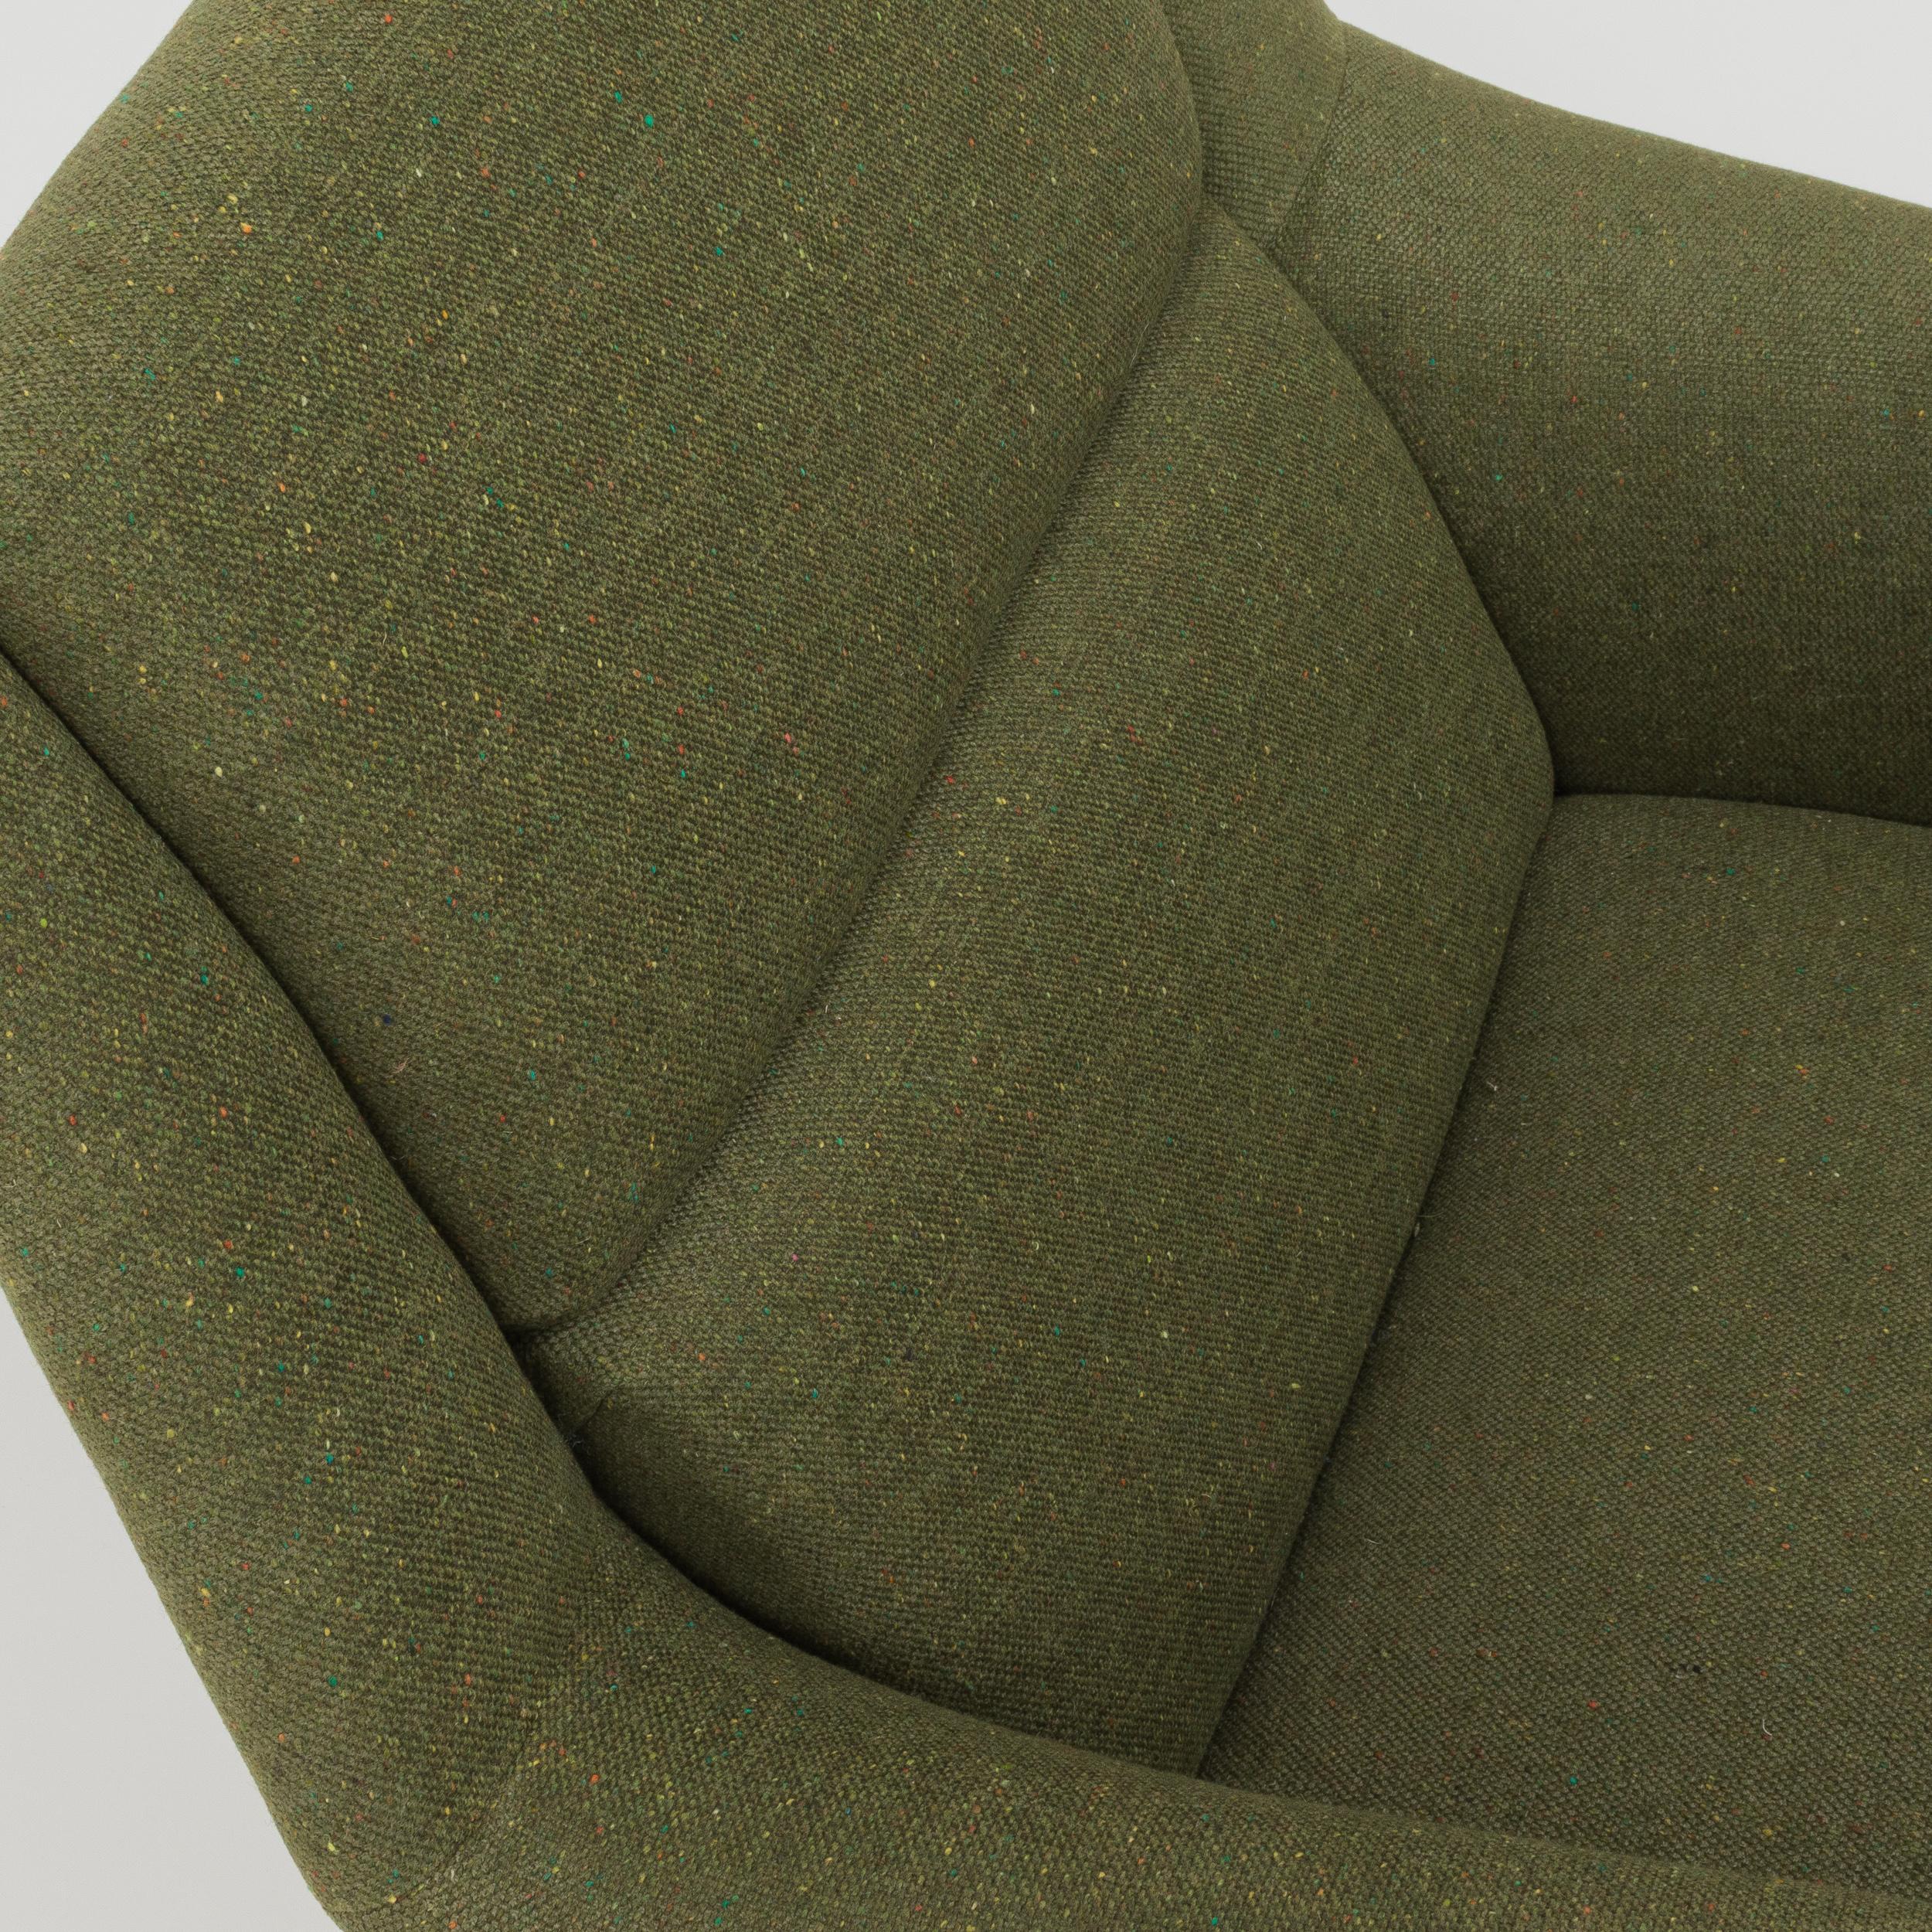 Midcentury Lounge Chair by Gio Ponti for Minotti in Green Fabric 1